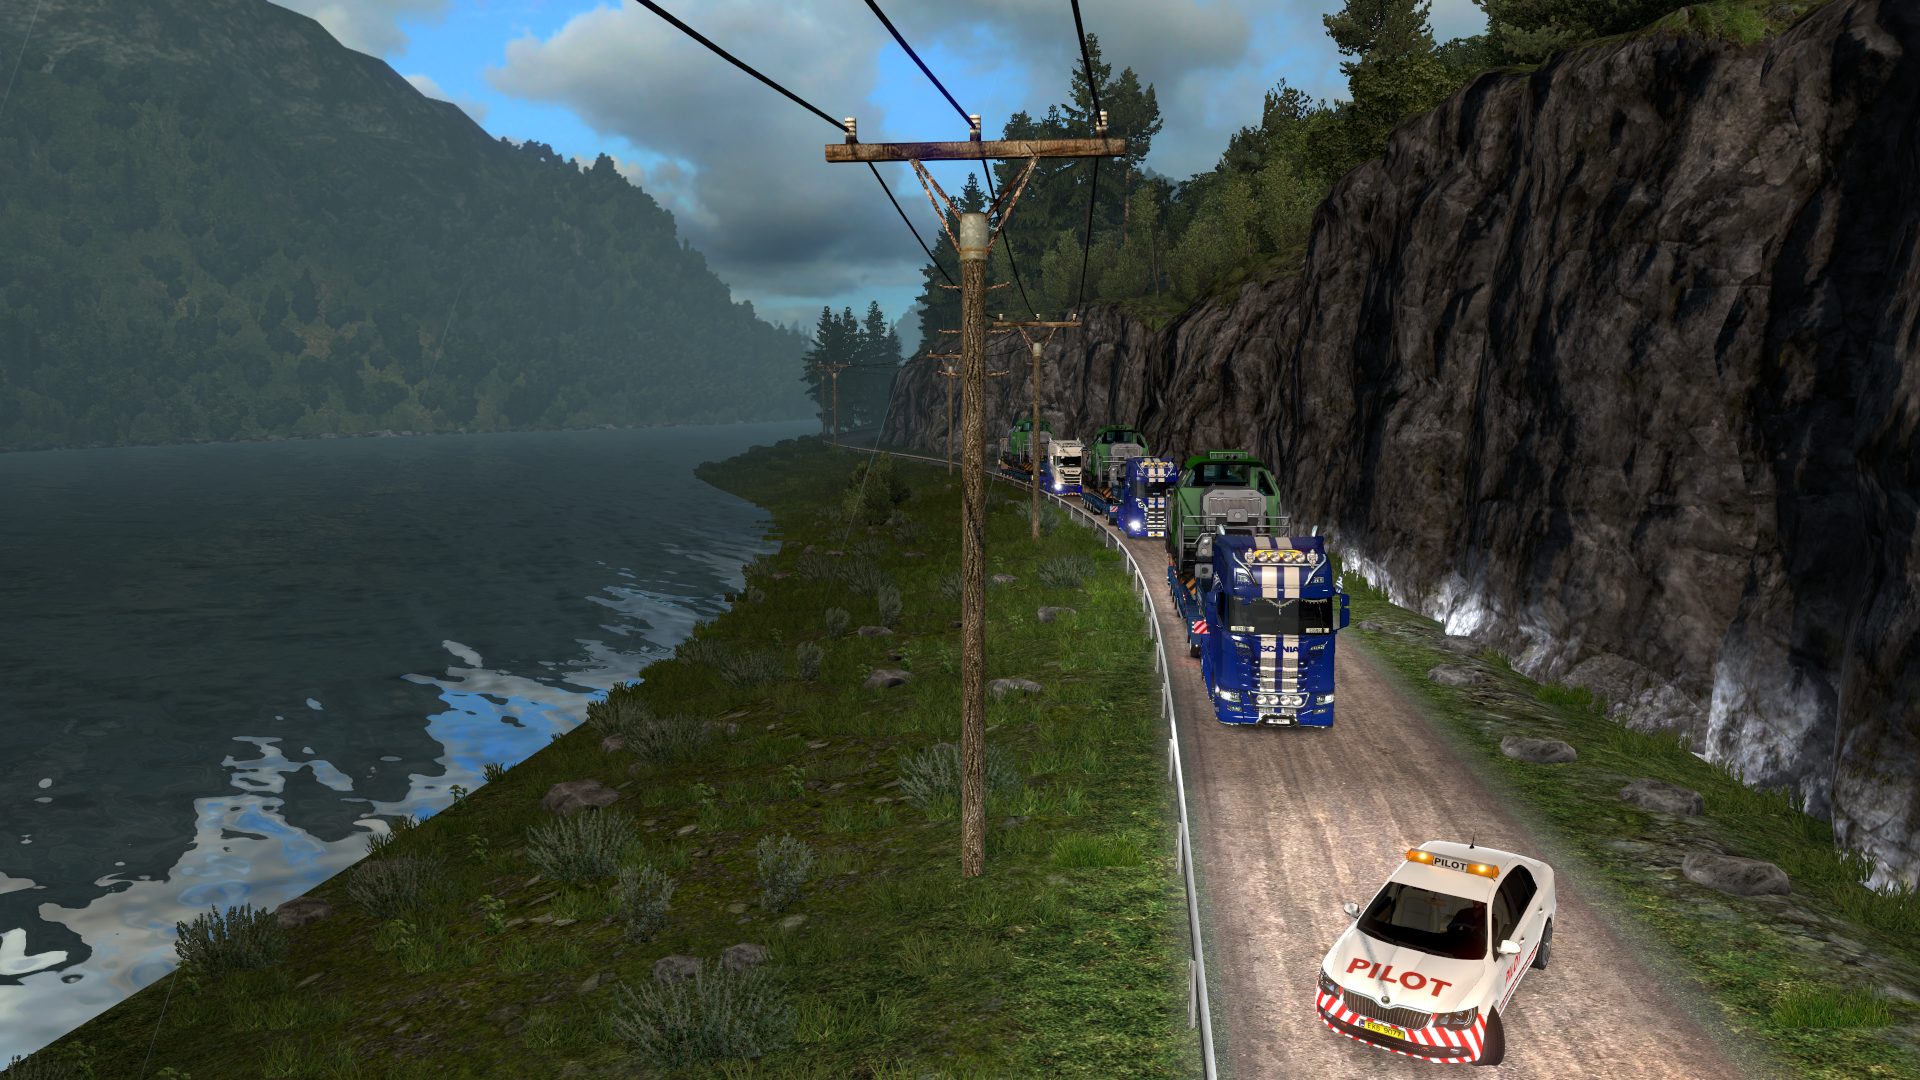 ets2_20200224_213148_00.png